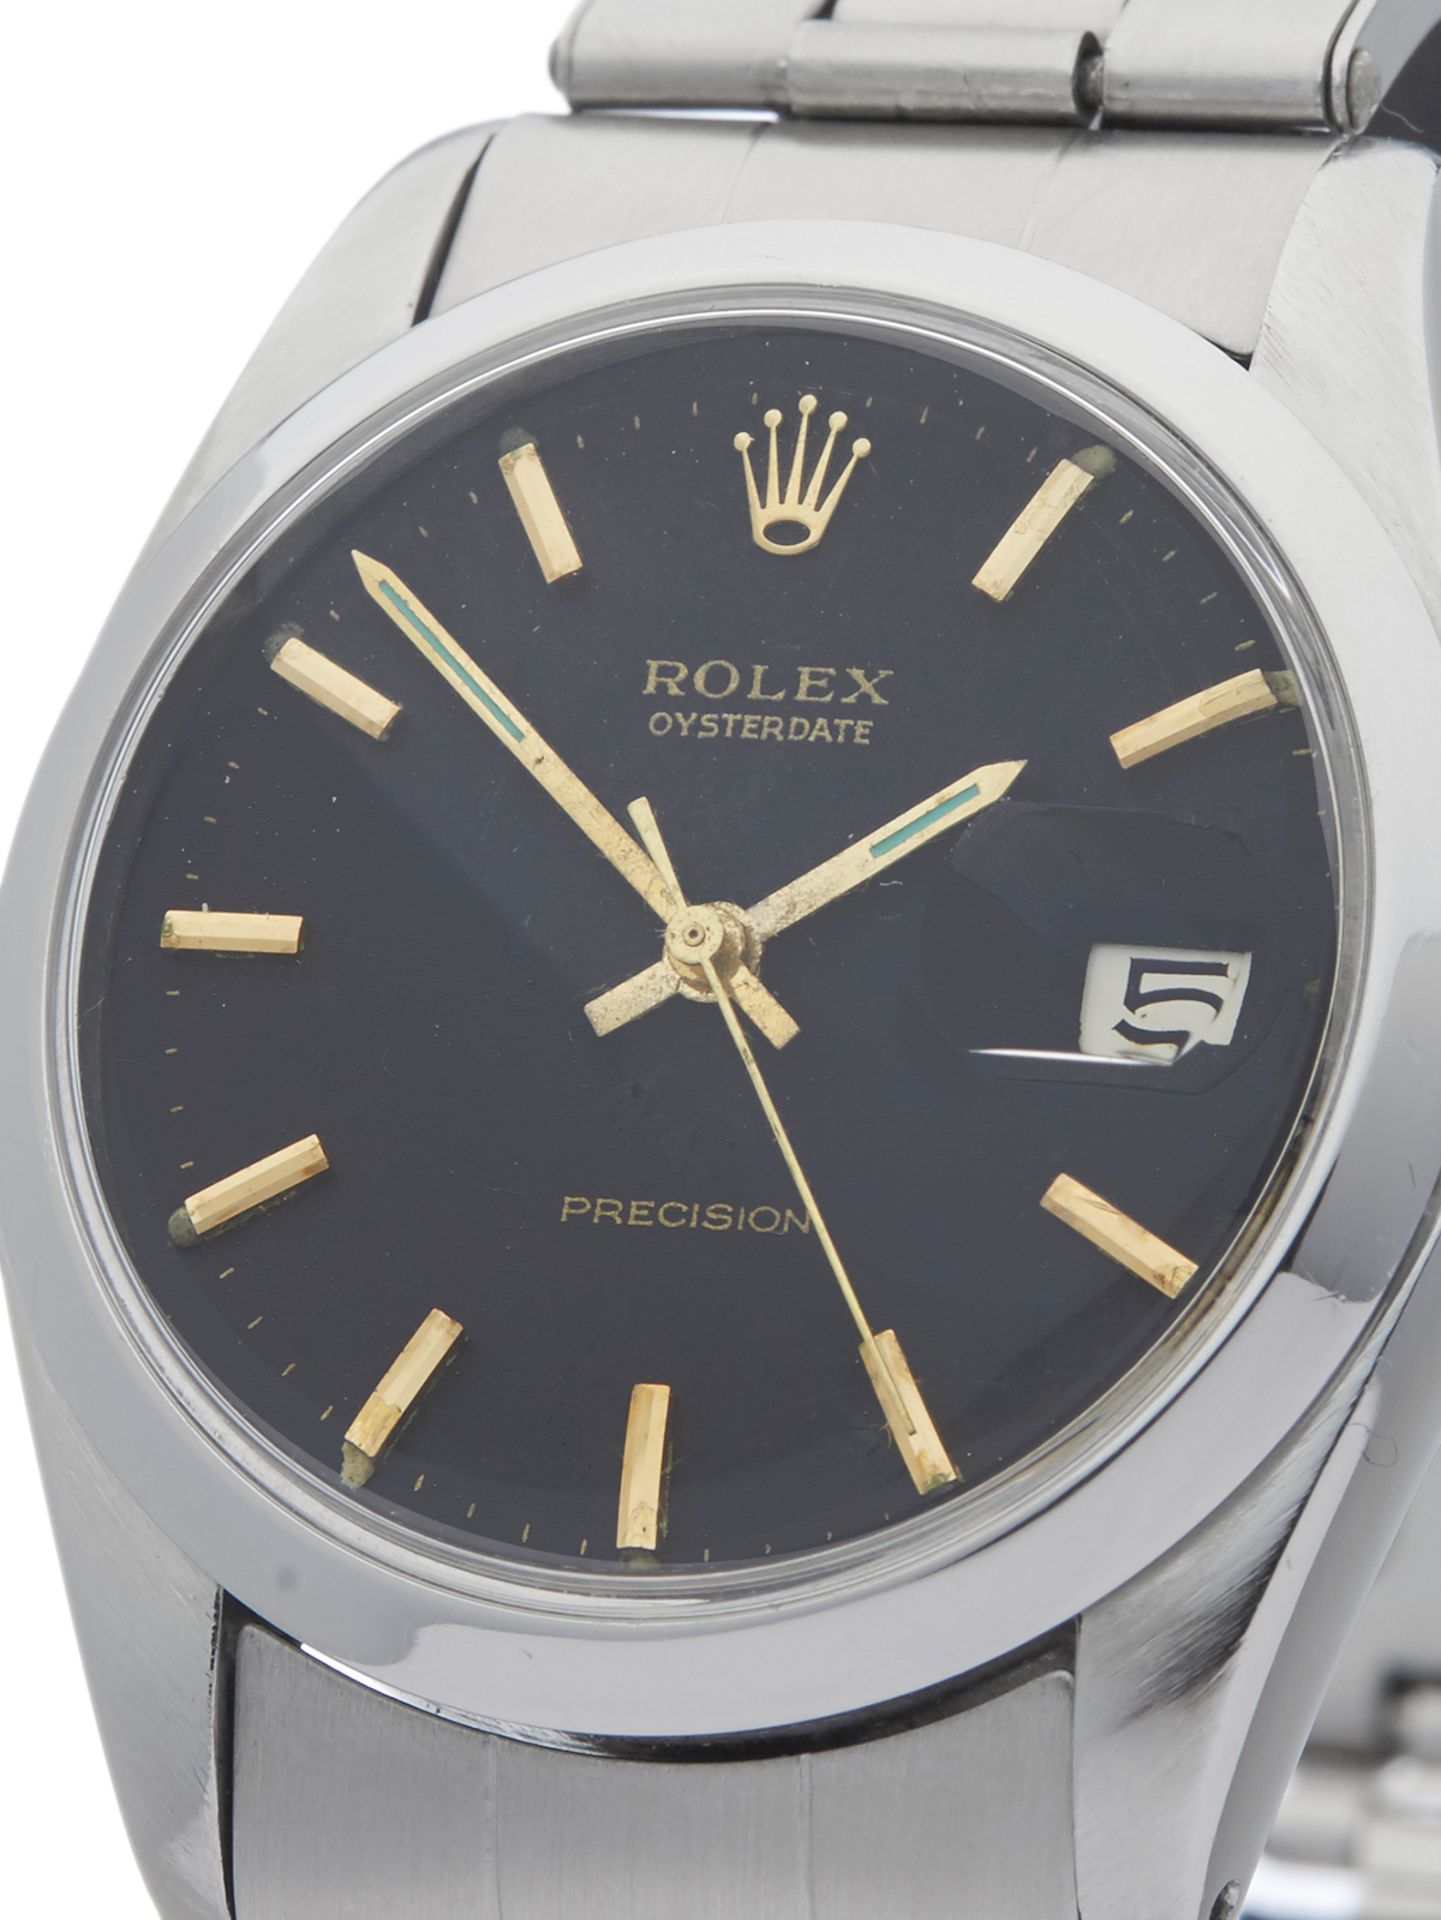 Rolex Oysterdate Precision 34mm Stainless Steel 6694 - Image 3 of 9